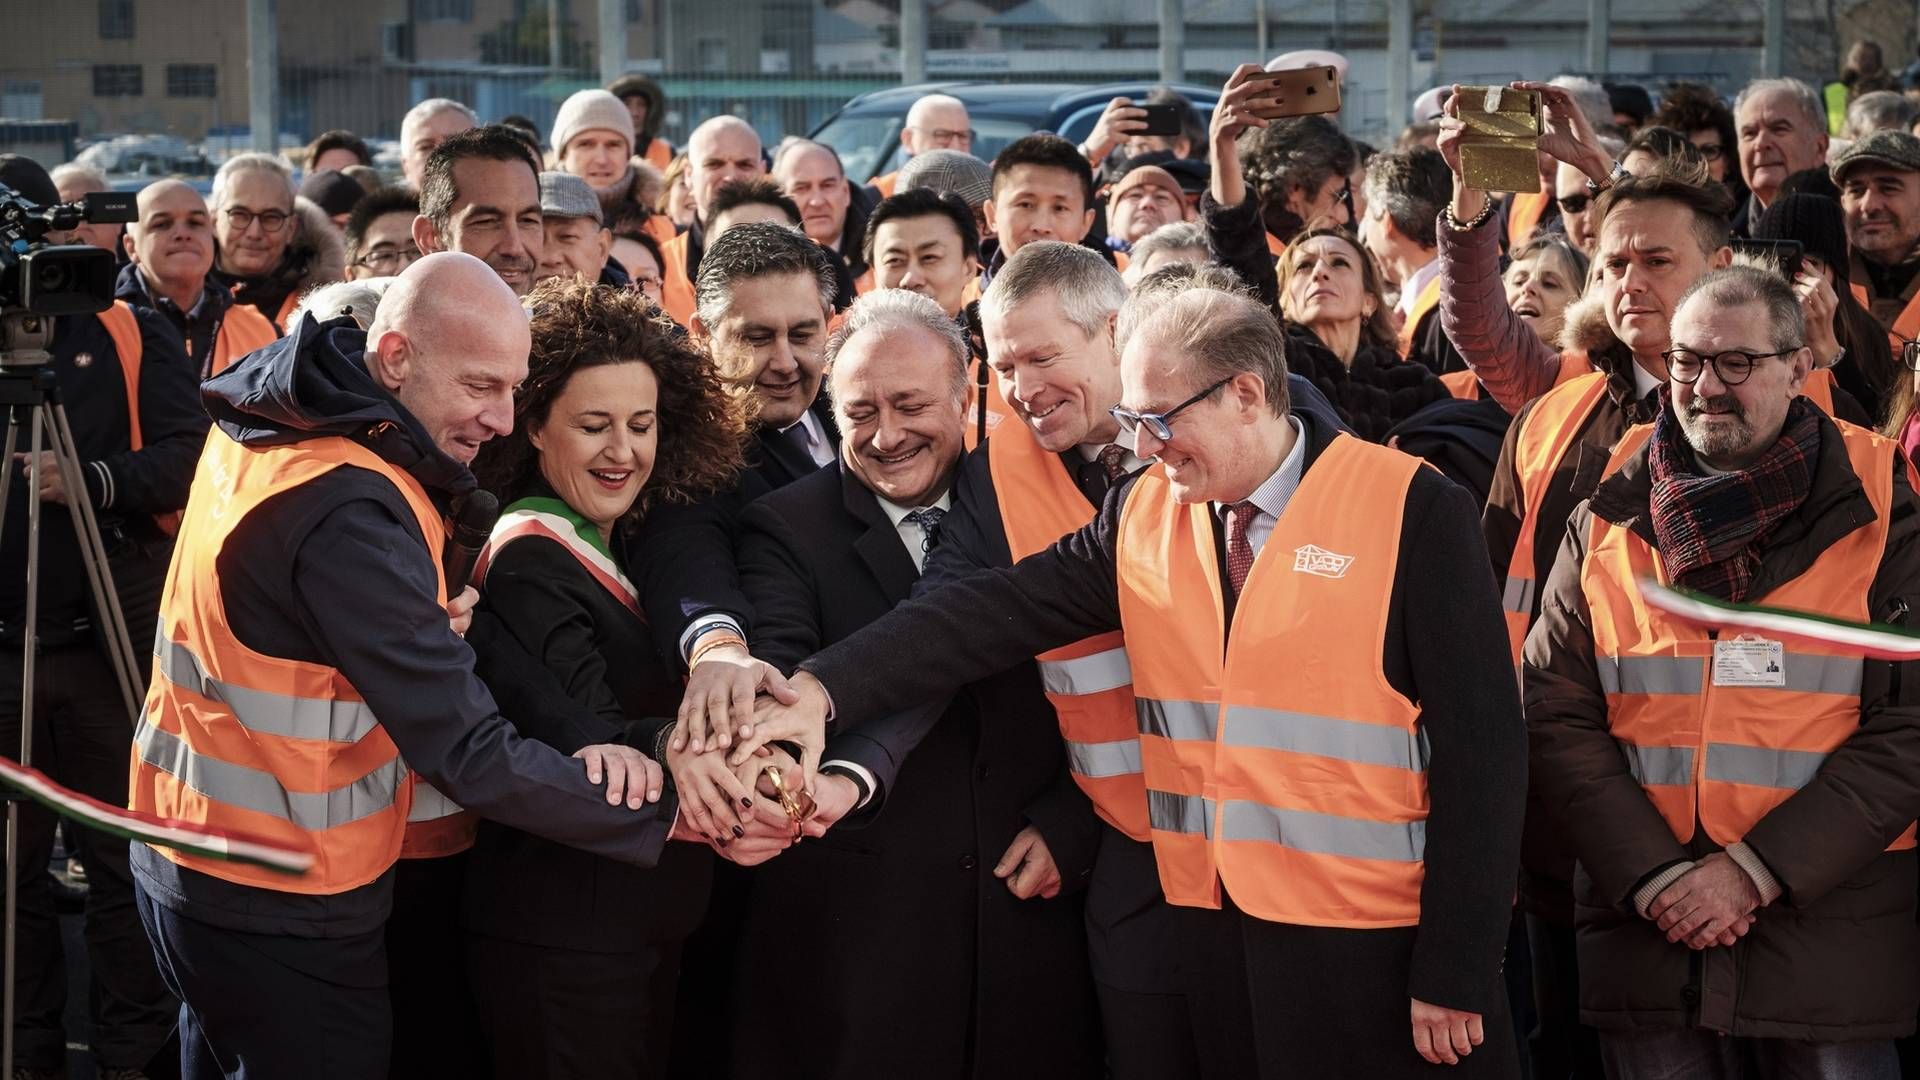 APM Terminals CEO, Morten Engelstoft, (number two from the right in the front row) helped inaugurate the Vado Lugire terminal in Italy. | Photo: PR-FOTO